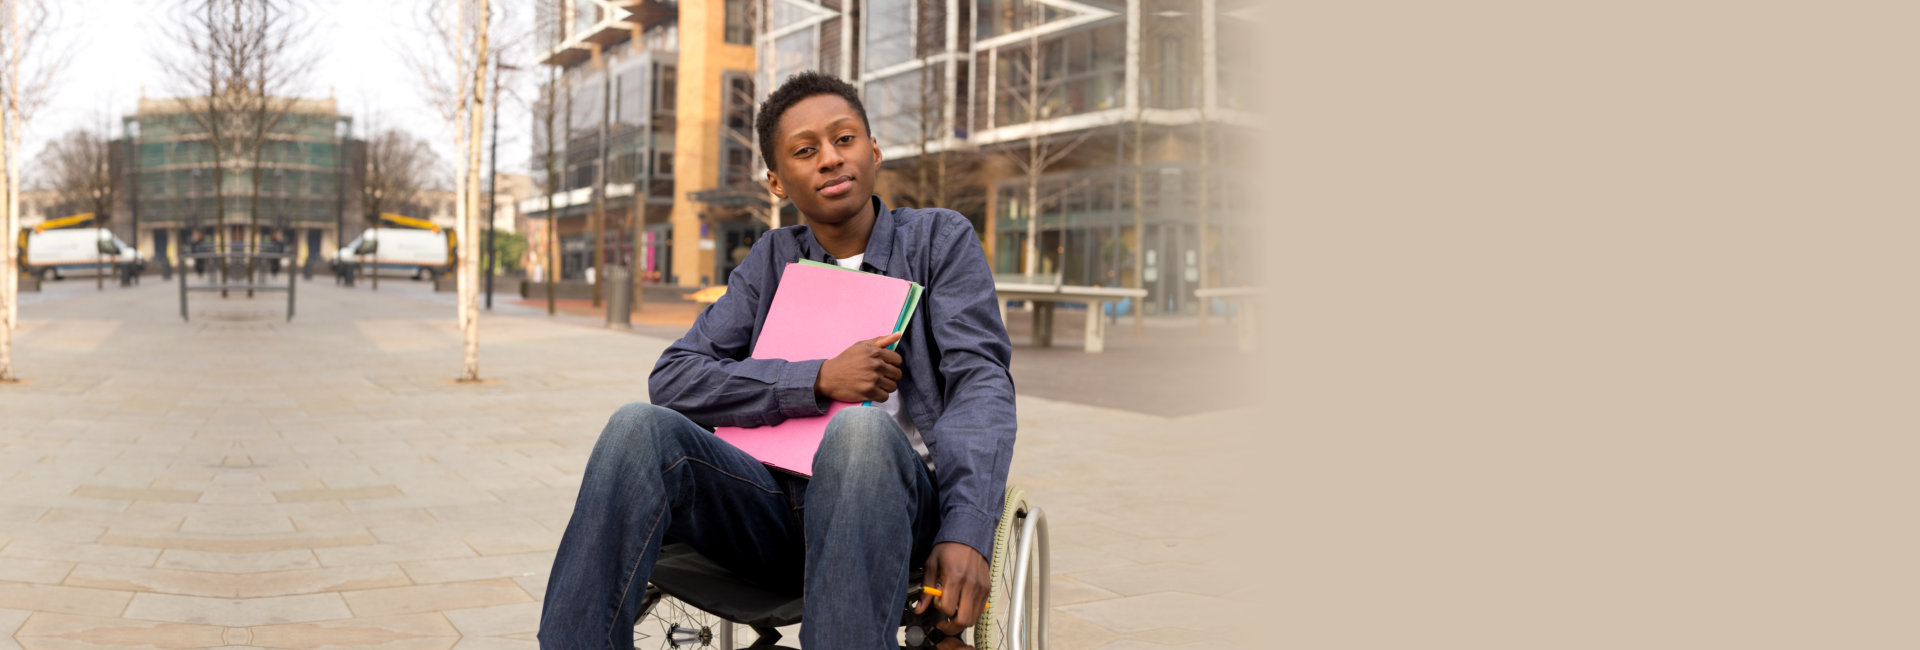 young man in a wheelchair holding documents